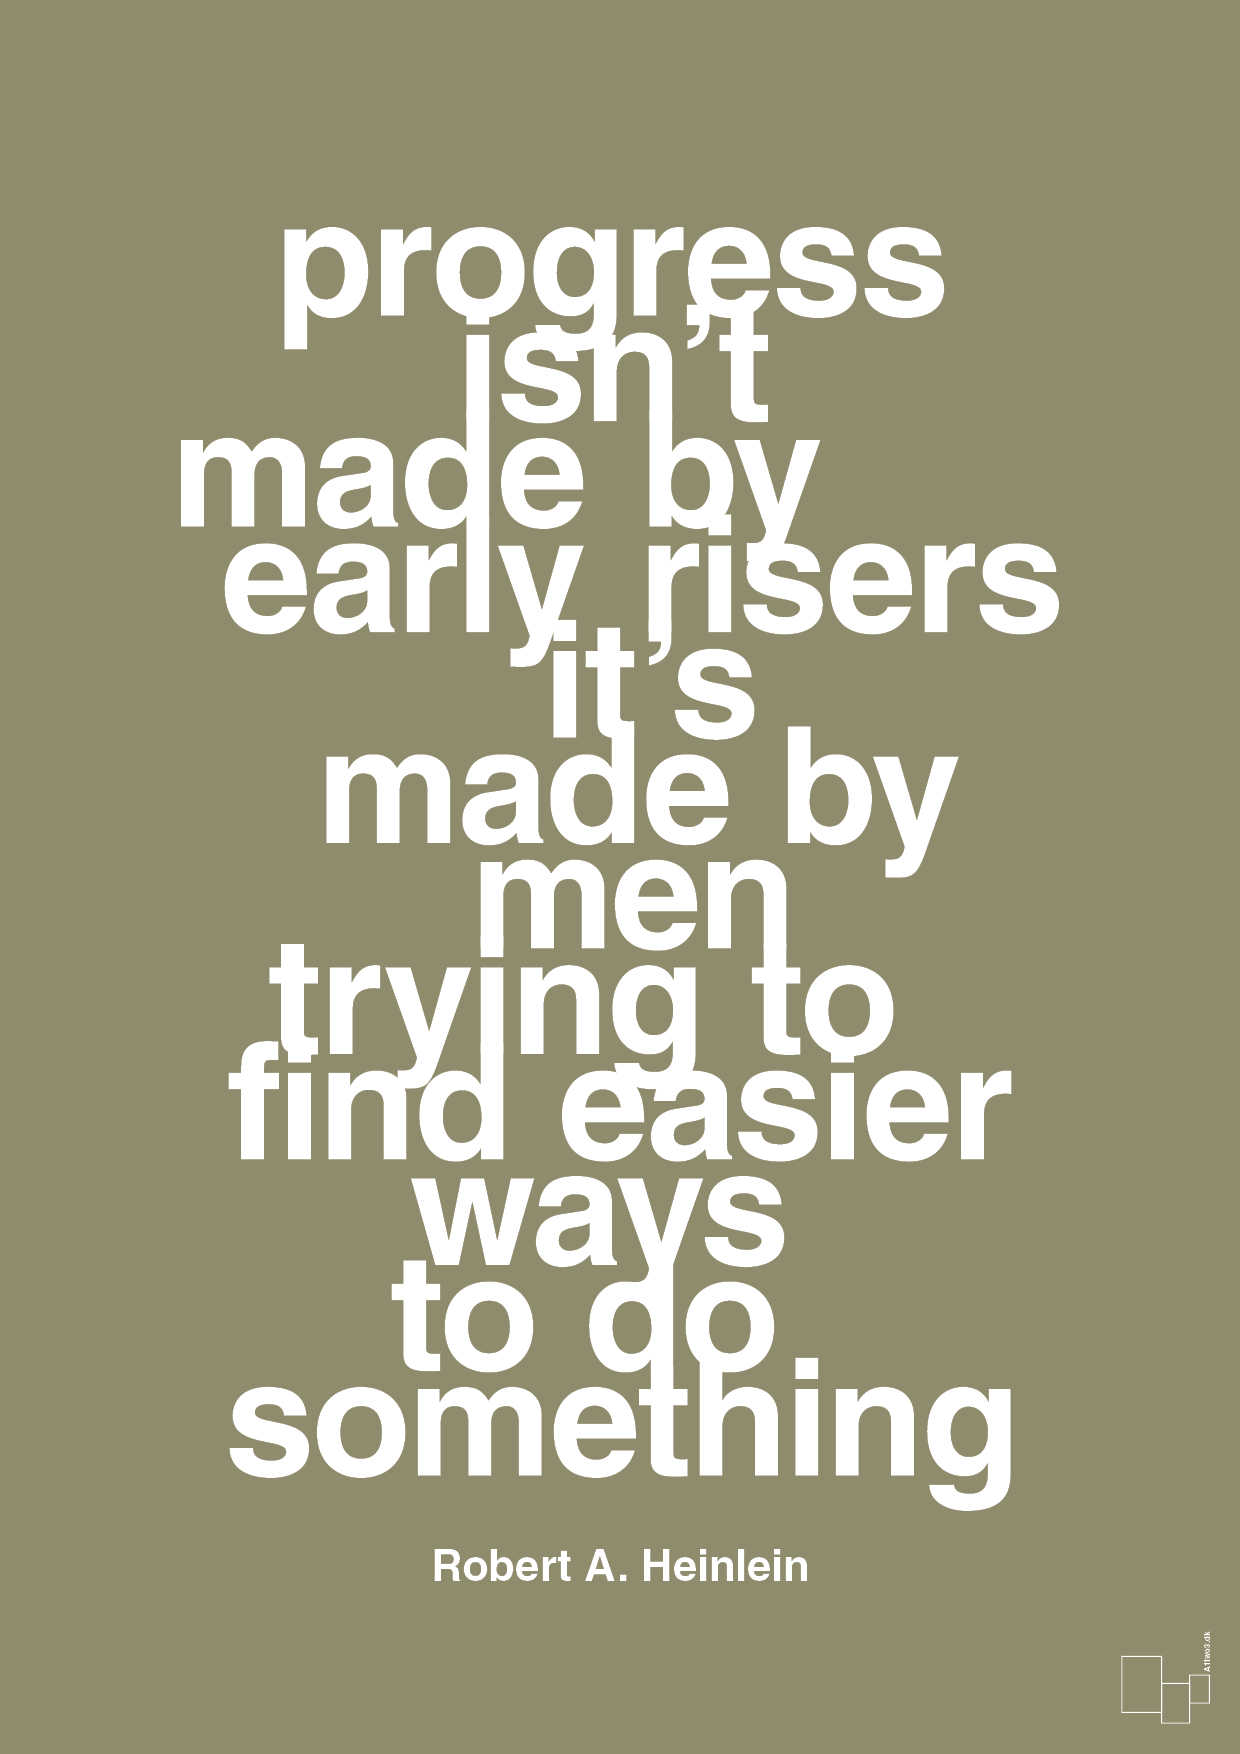 progress isnt made by early risers - Plakat med Citater i Misty Forrest